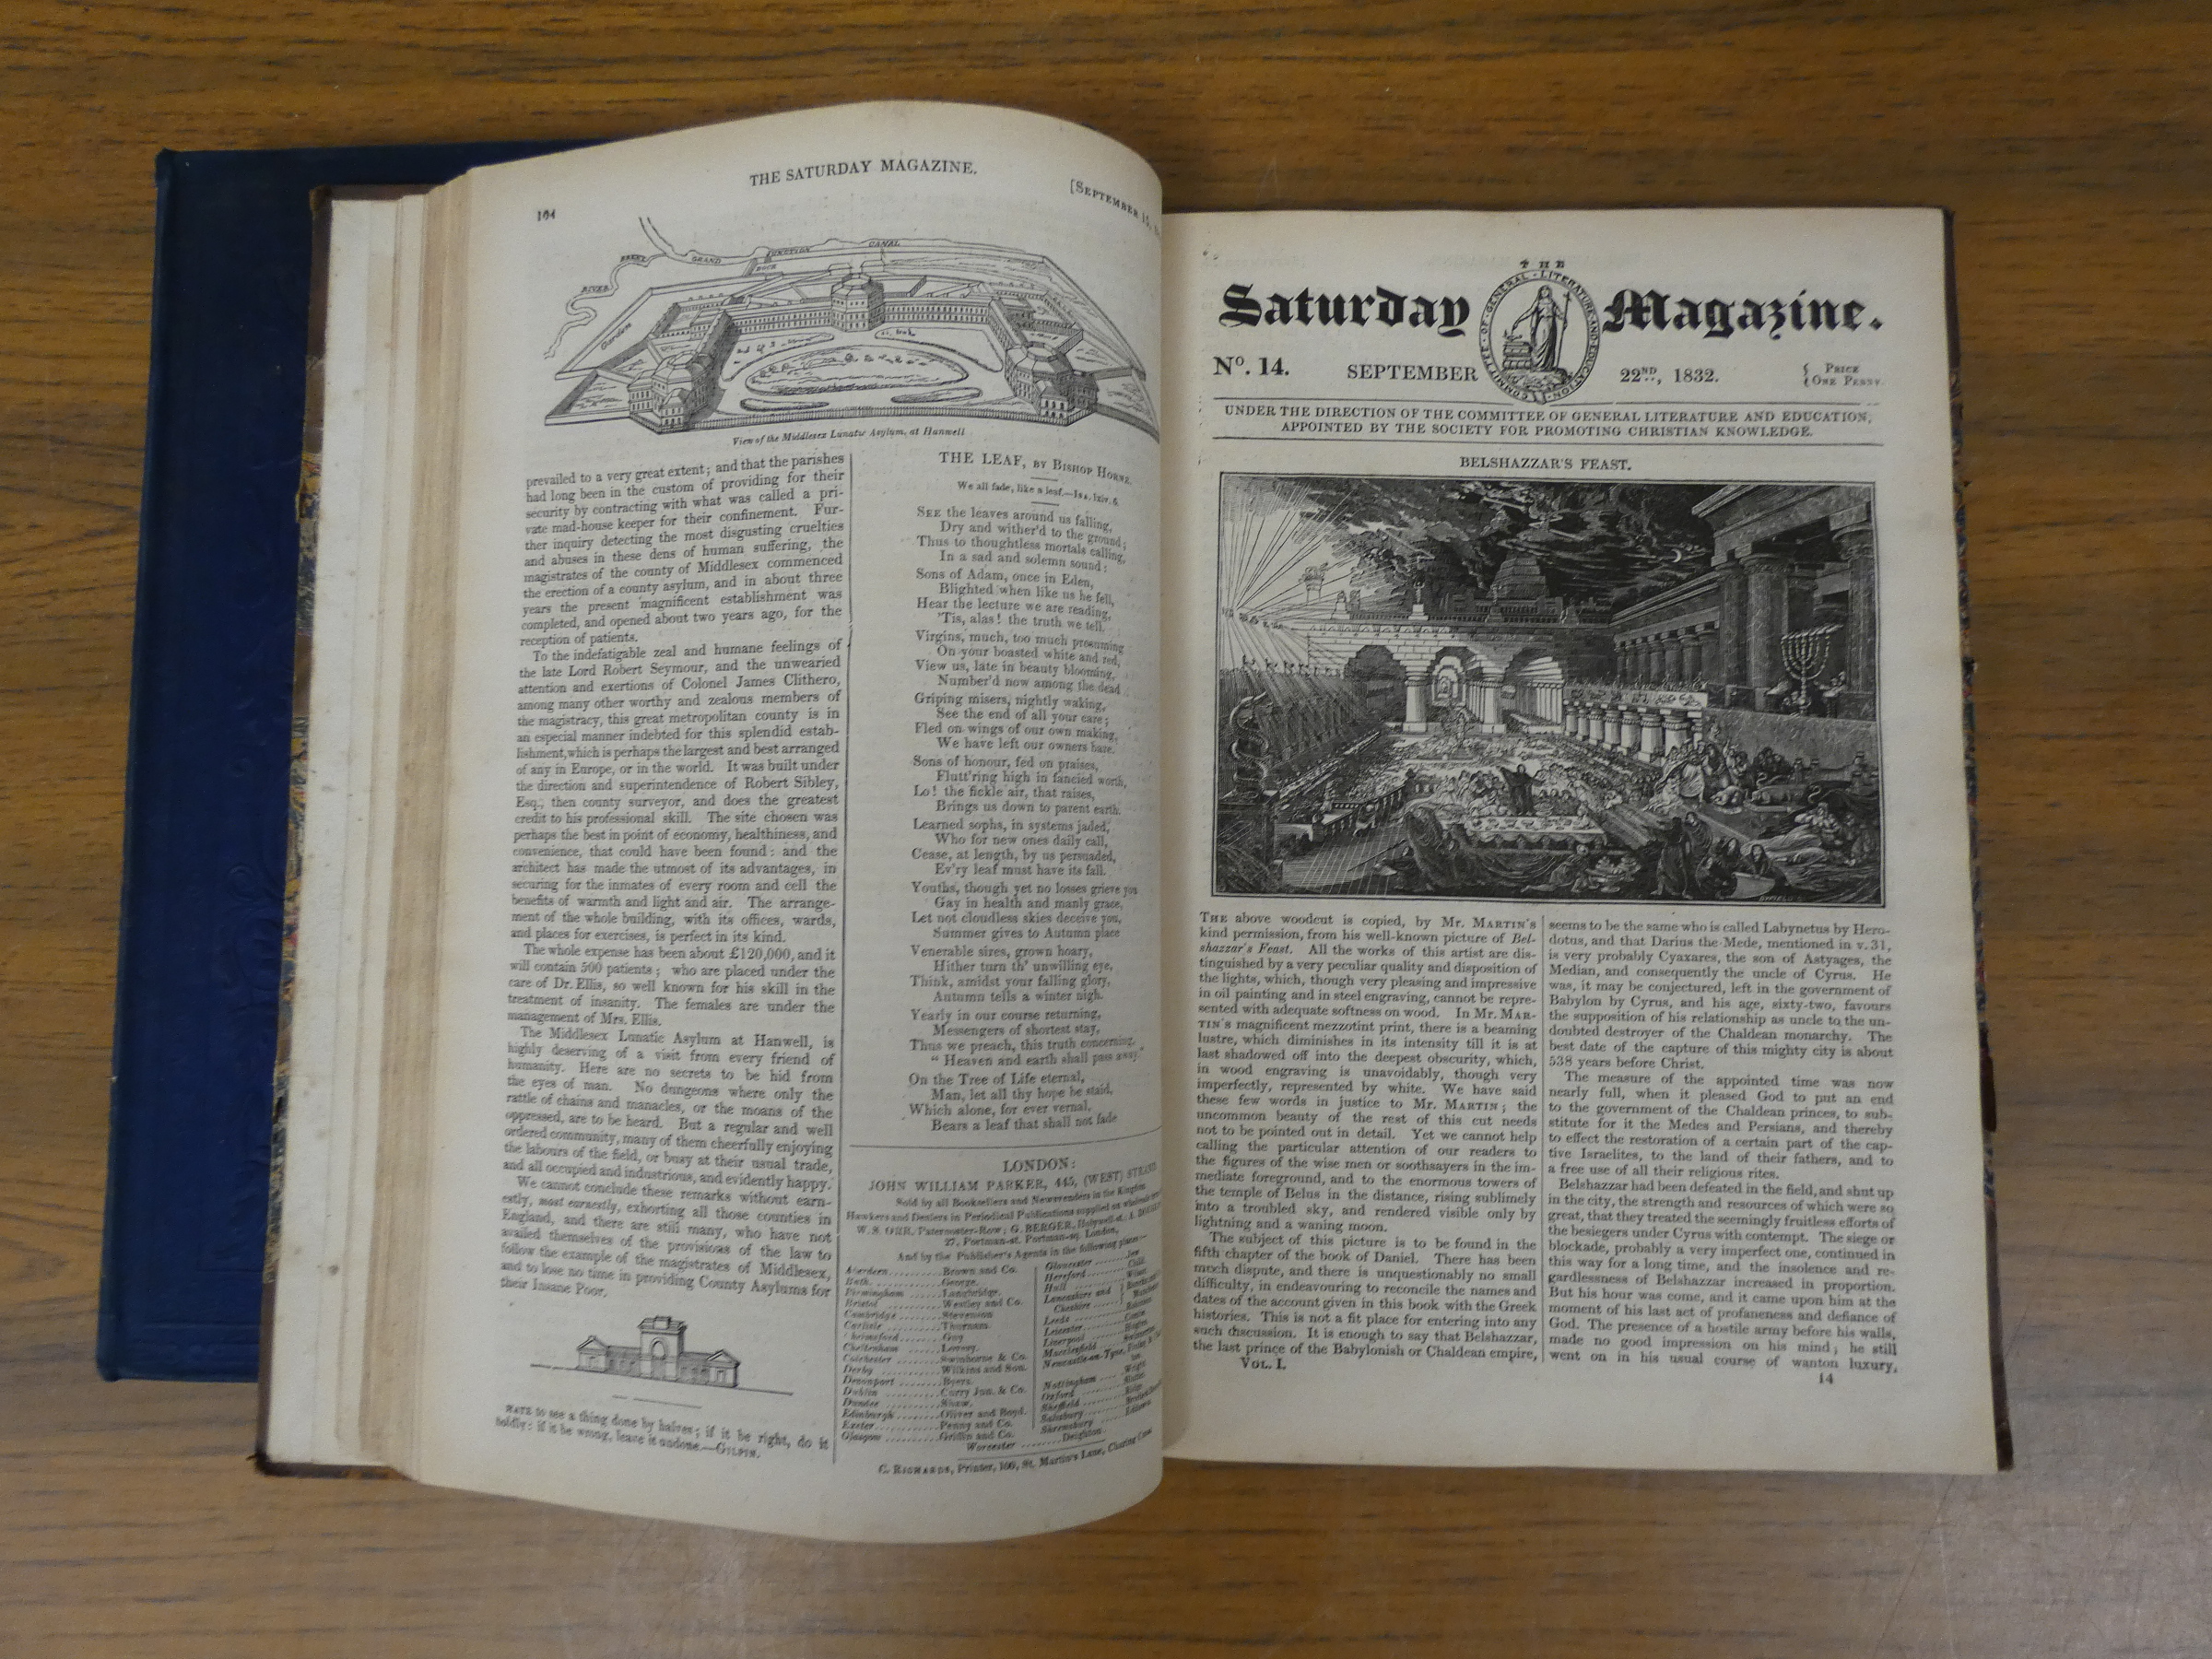 The Saturday Magazine.  Volume The First. Bound vol. containing nos. 1 to 32. Eng. illus. Small - Image 4 of 4